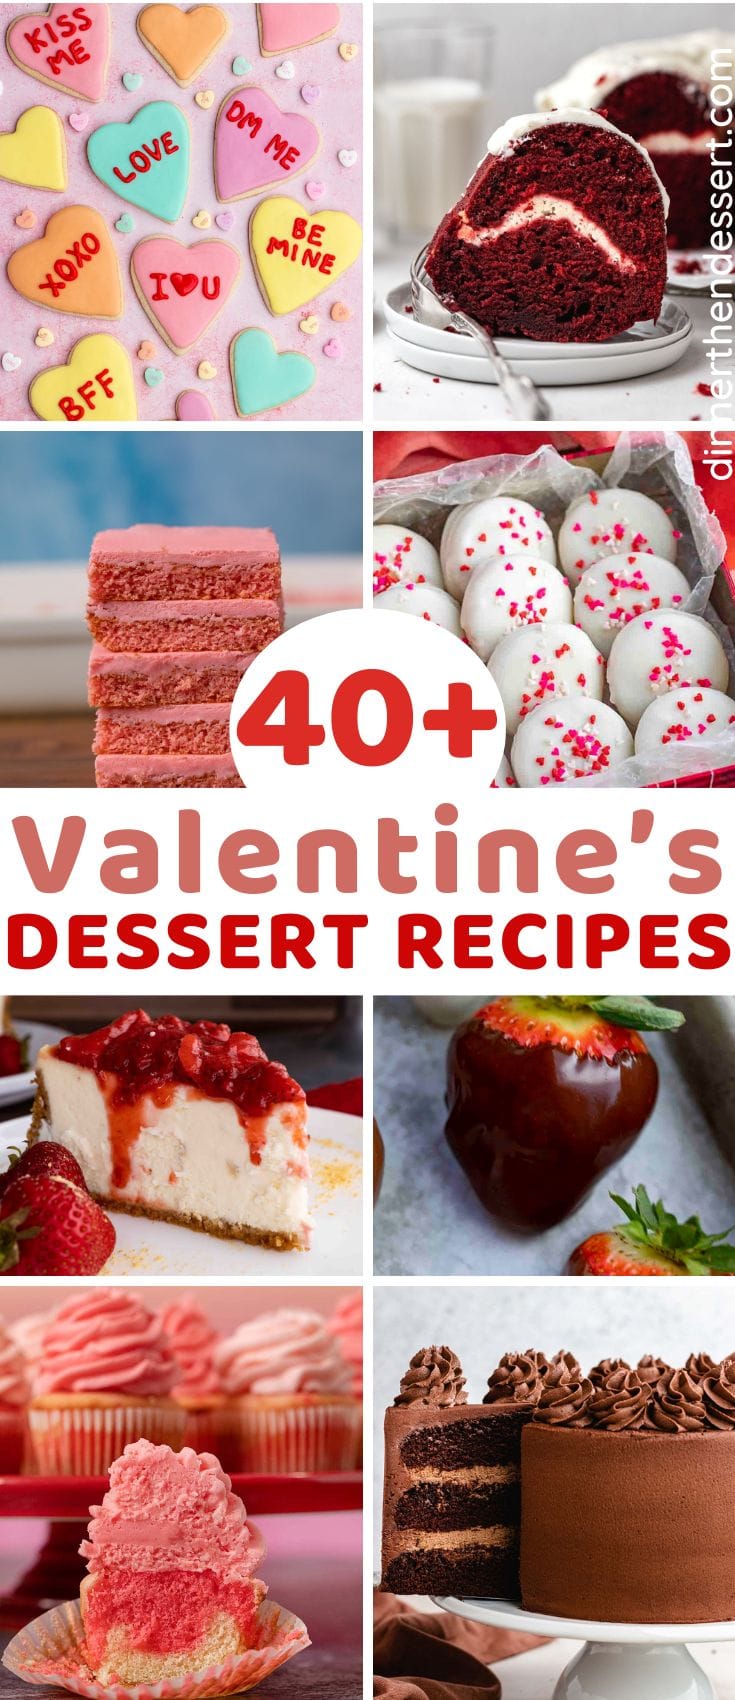 40+ Valentines Day Desserts collage of featured recipes in the collection